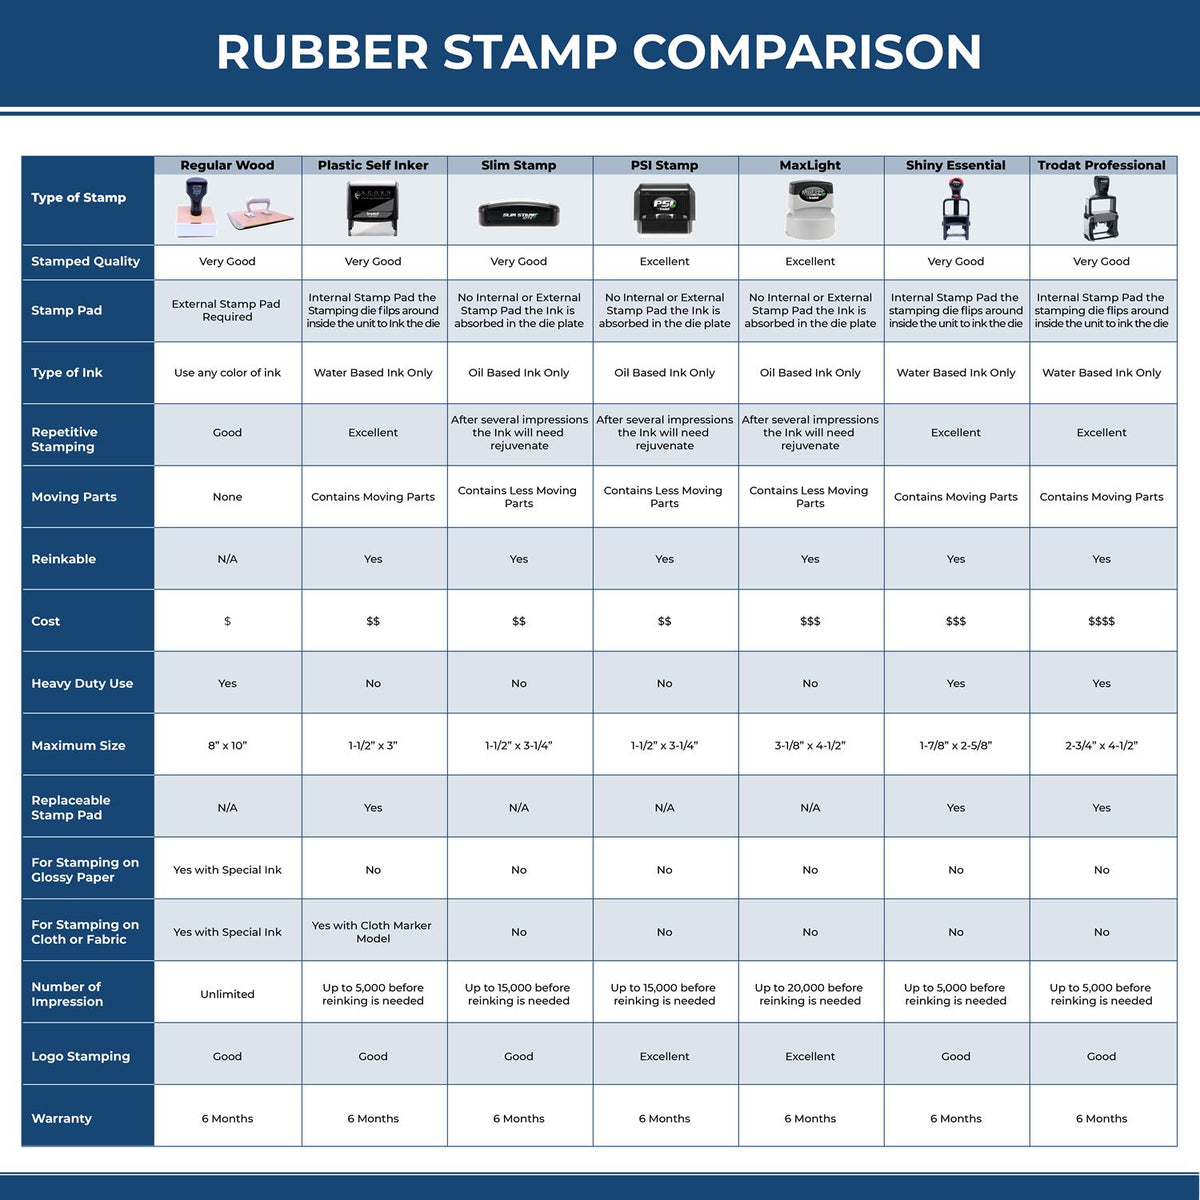 First Class Mail International Rubber Stamp 4449R Rubber Stamp Comparison